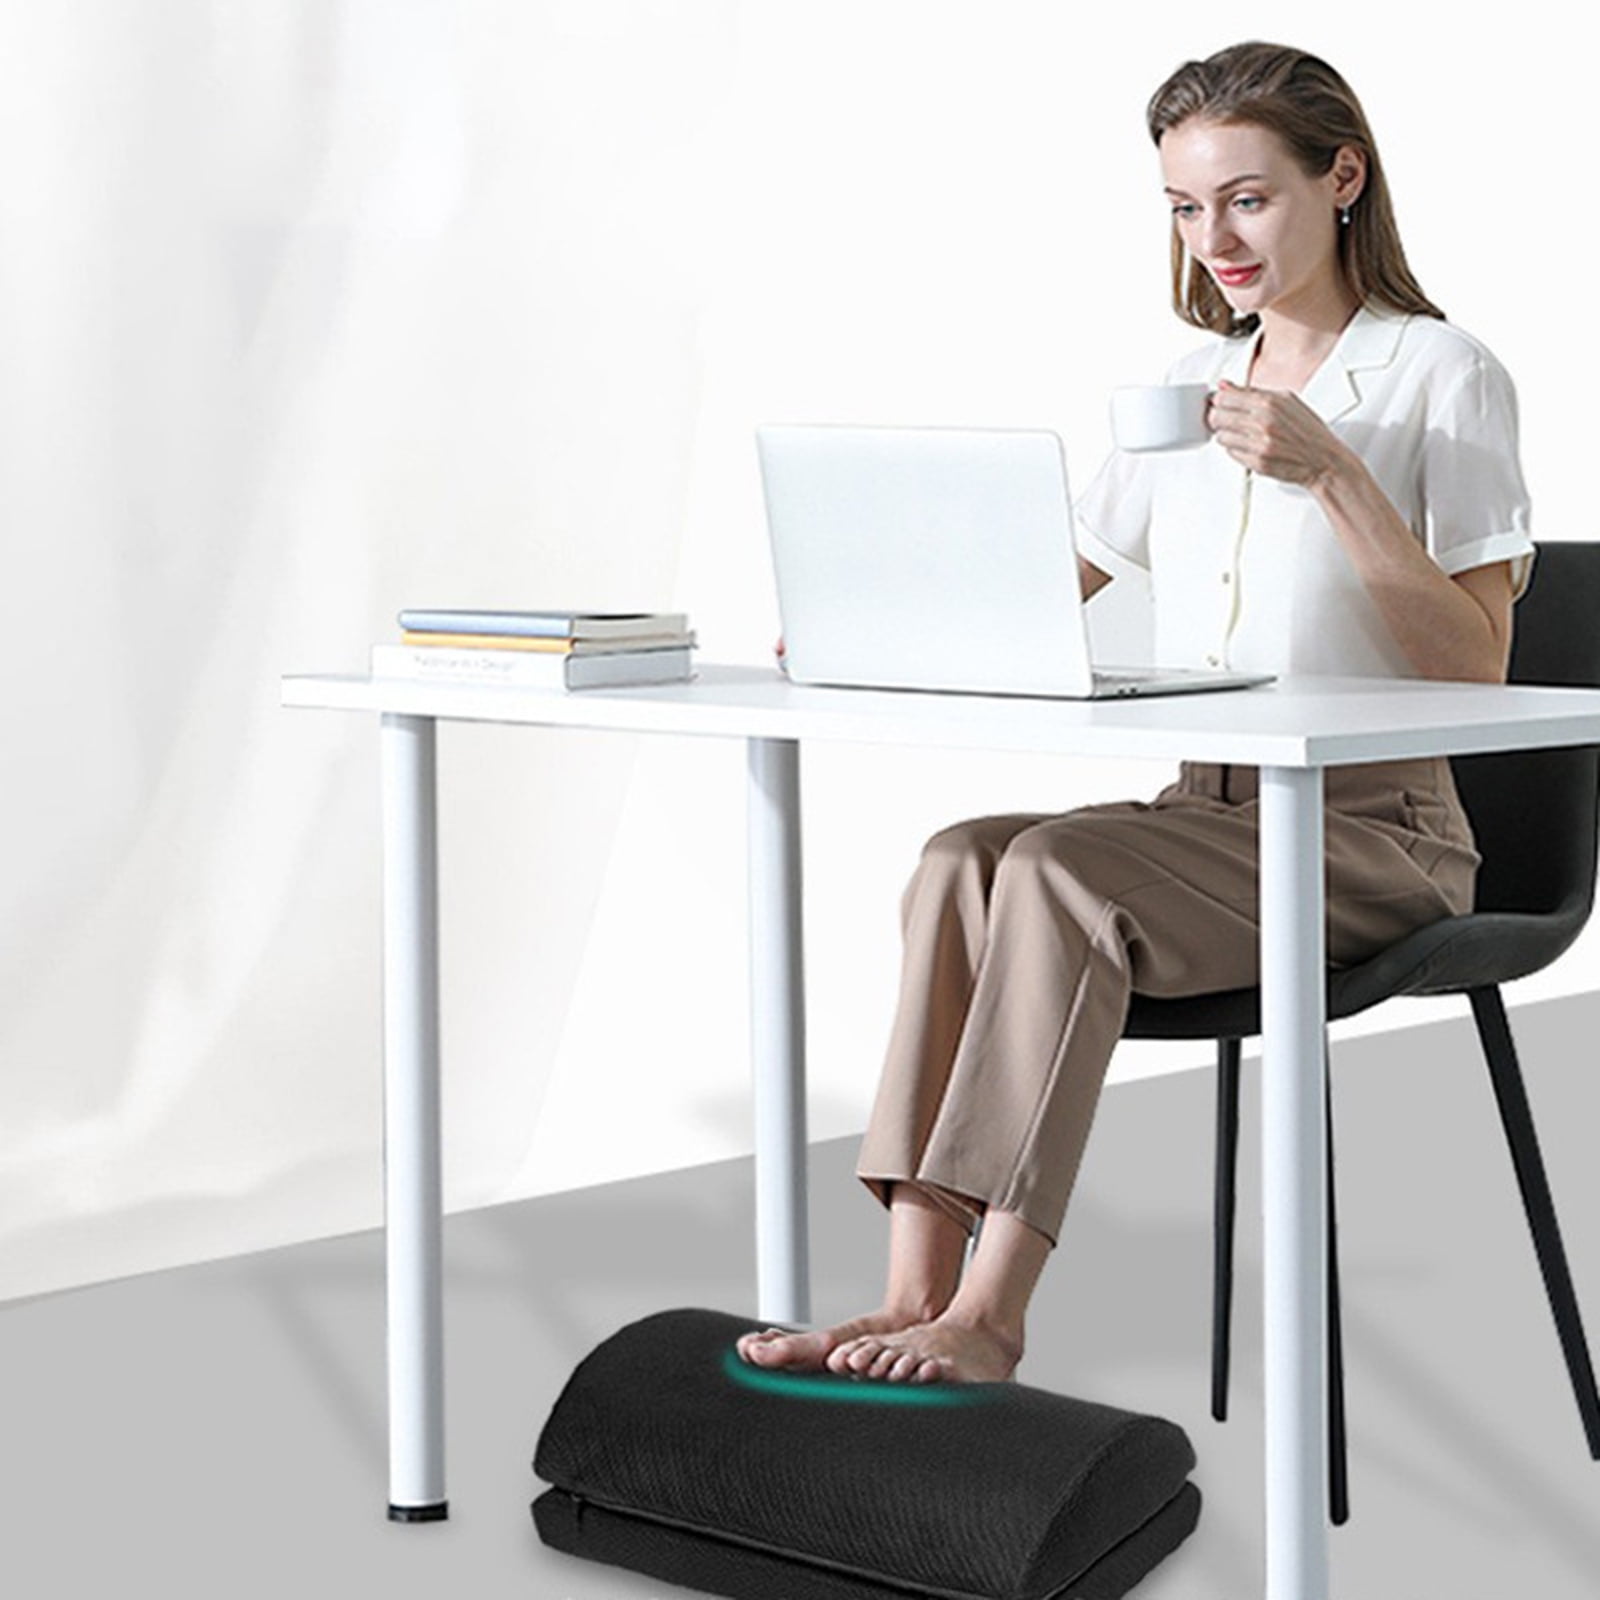 Large Size Foot Rest for Under Desk with 3 Adjust Heights - Memory Foam  Foot Stool - Back, Lumbar, and Knee Pain Relief - Perfect for Office, Home